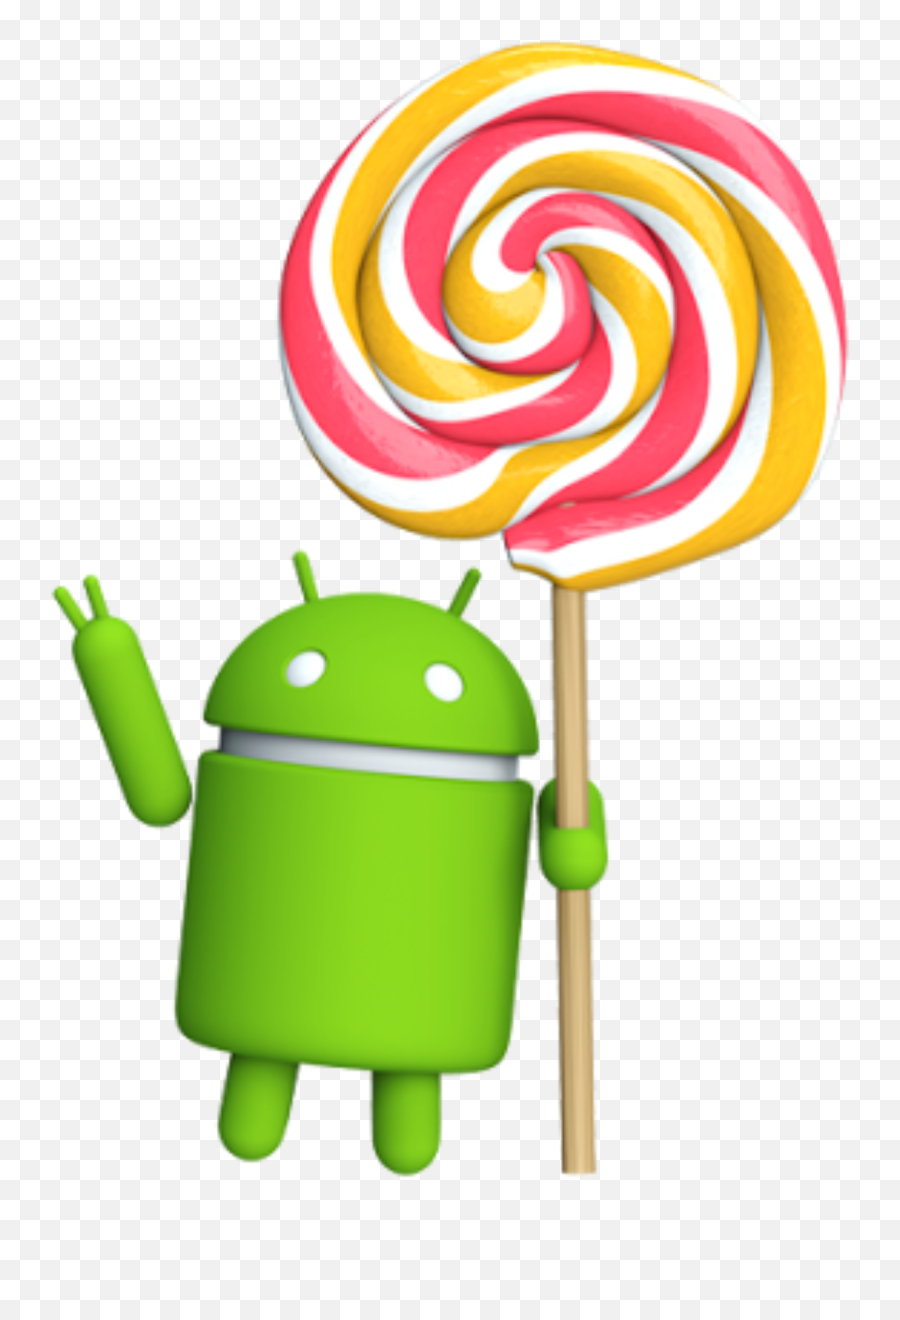 Android Lollipop Download Iso - Appamatix All About Apps Android 5 Lollipop Logo Png,Marshmallow App Drawer Settings Icon